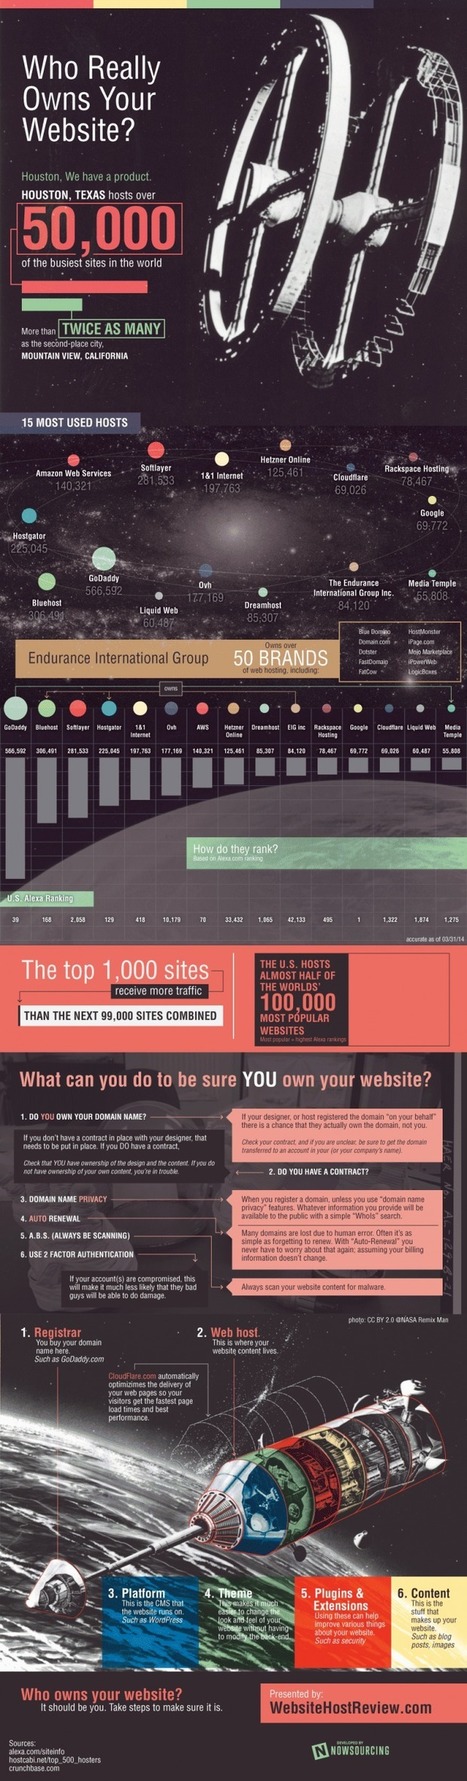 Are You The Boss Of Your Website? [INFOGRAPHIC] | Latest Social Media News | Scoop.it